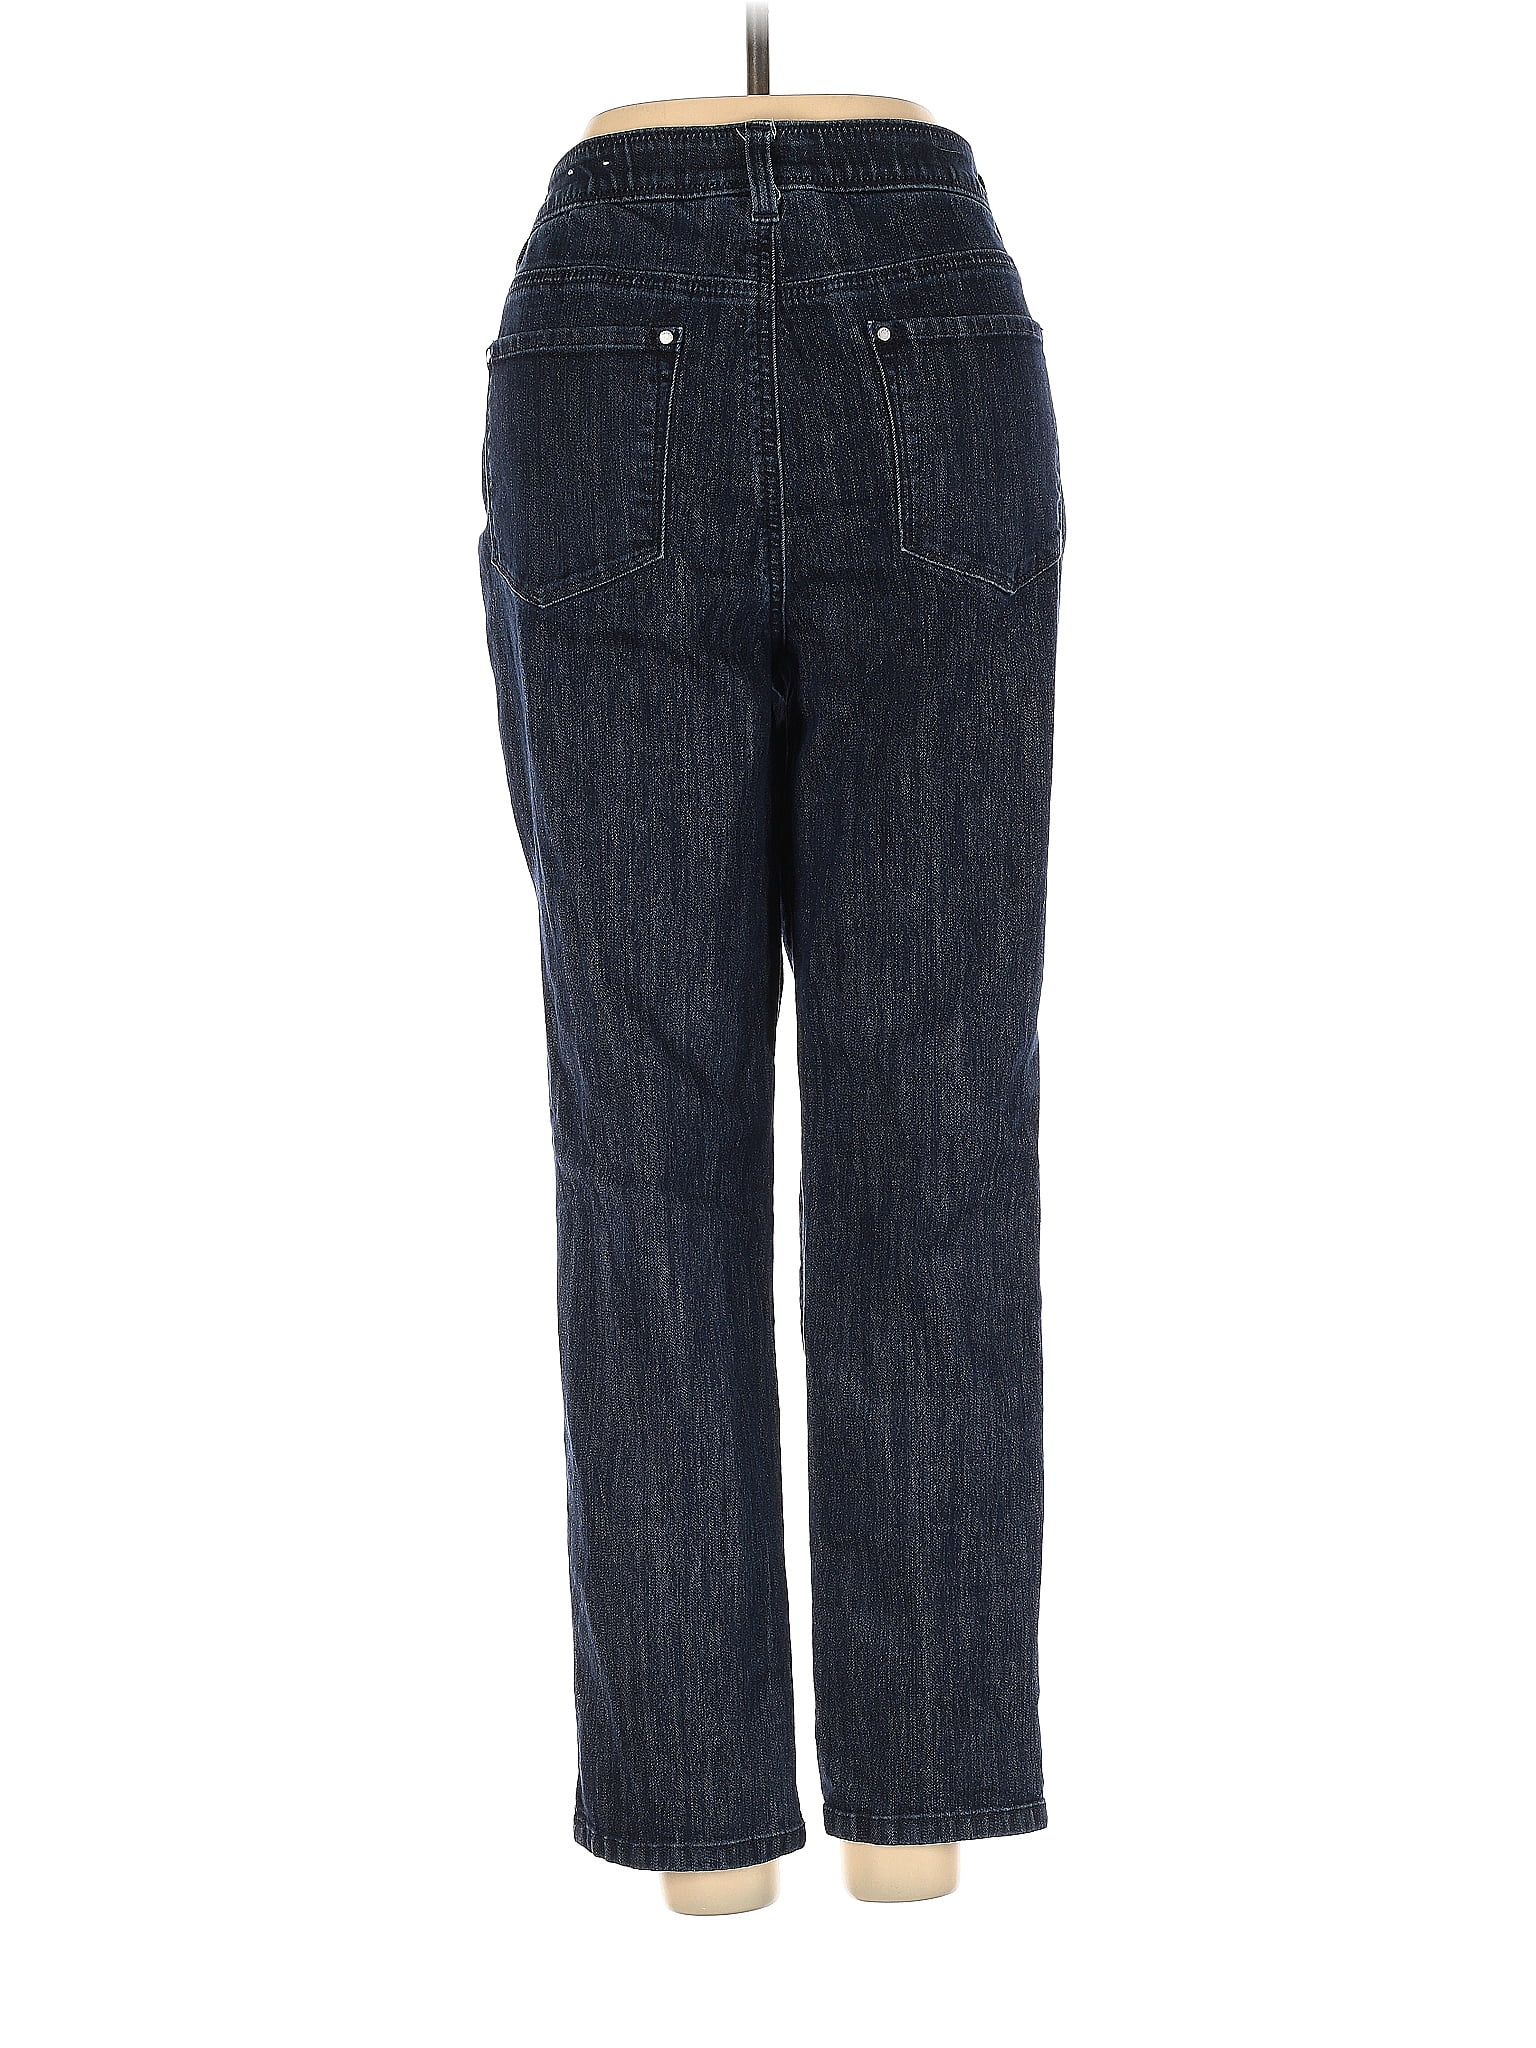 Fabulously Slimming by Chico's Solid Blue Jeans Size Sm (0.5) - 77% off